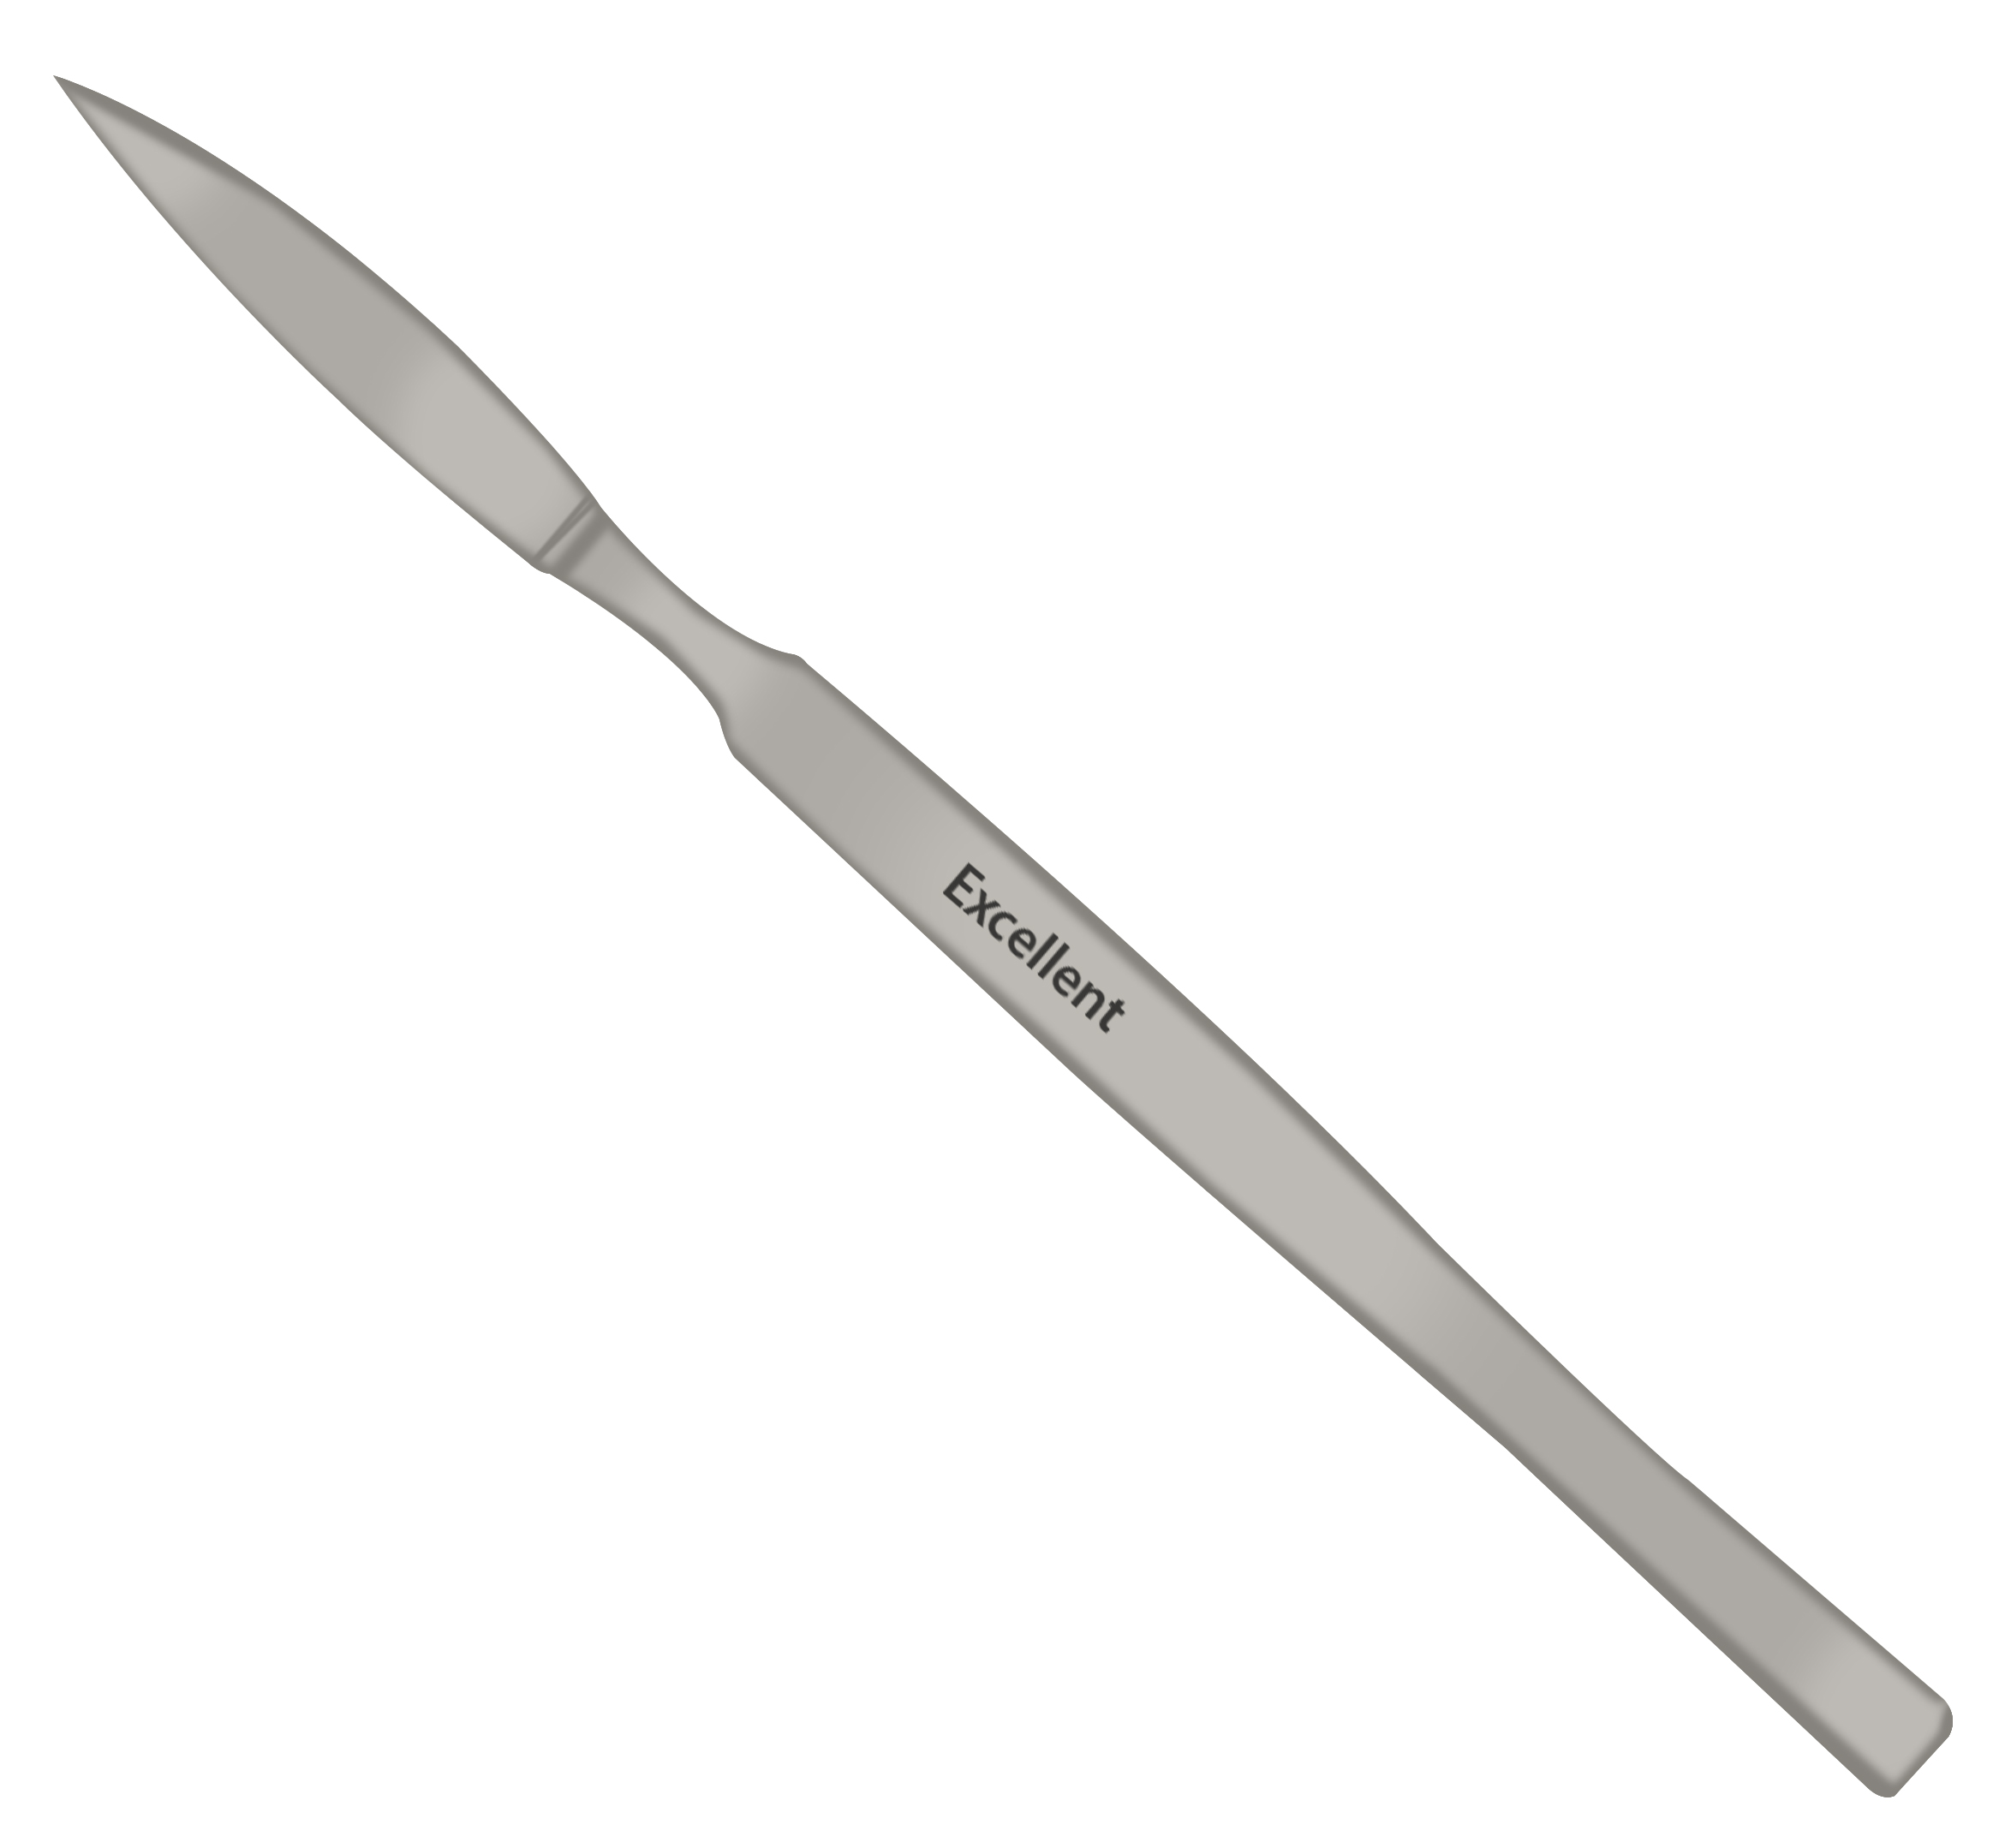 Excellent nail knife slim